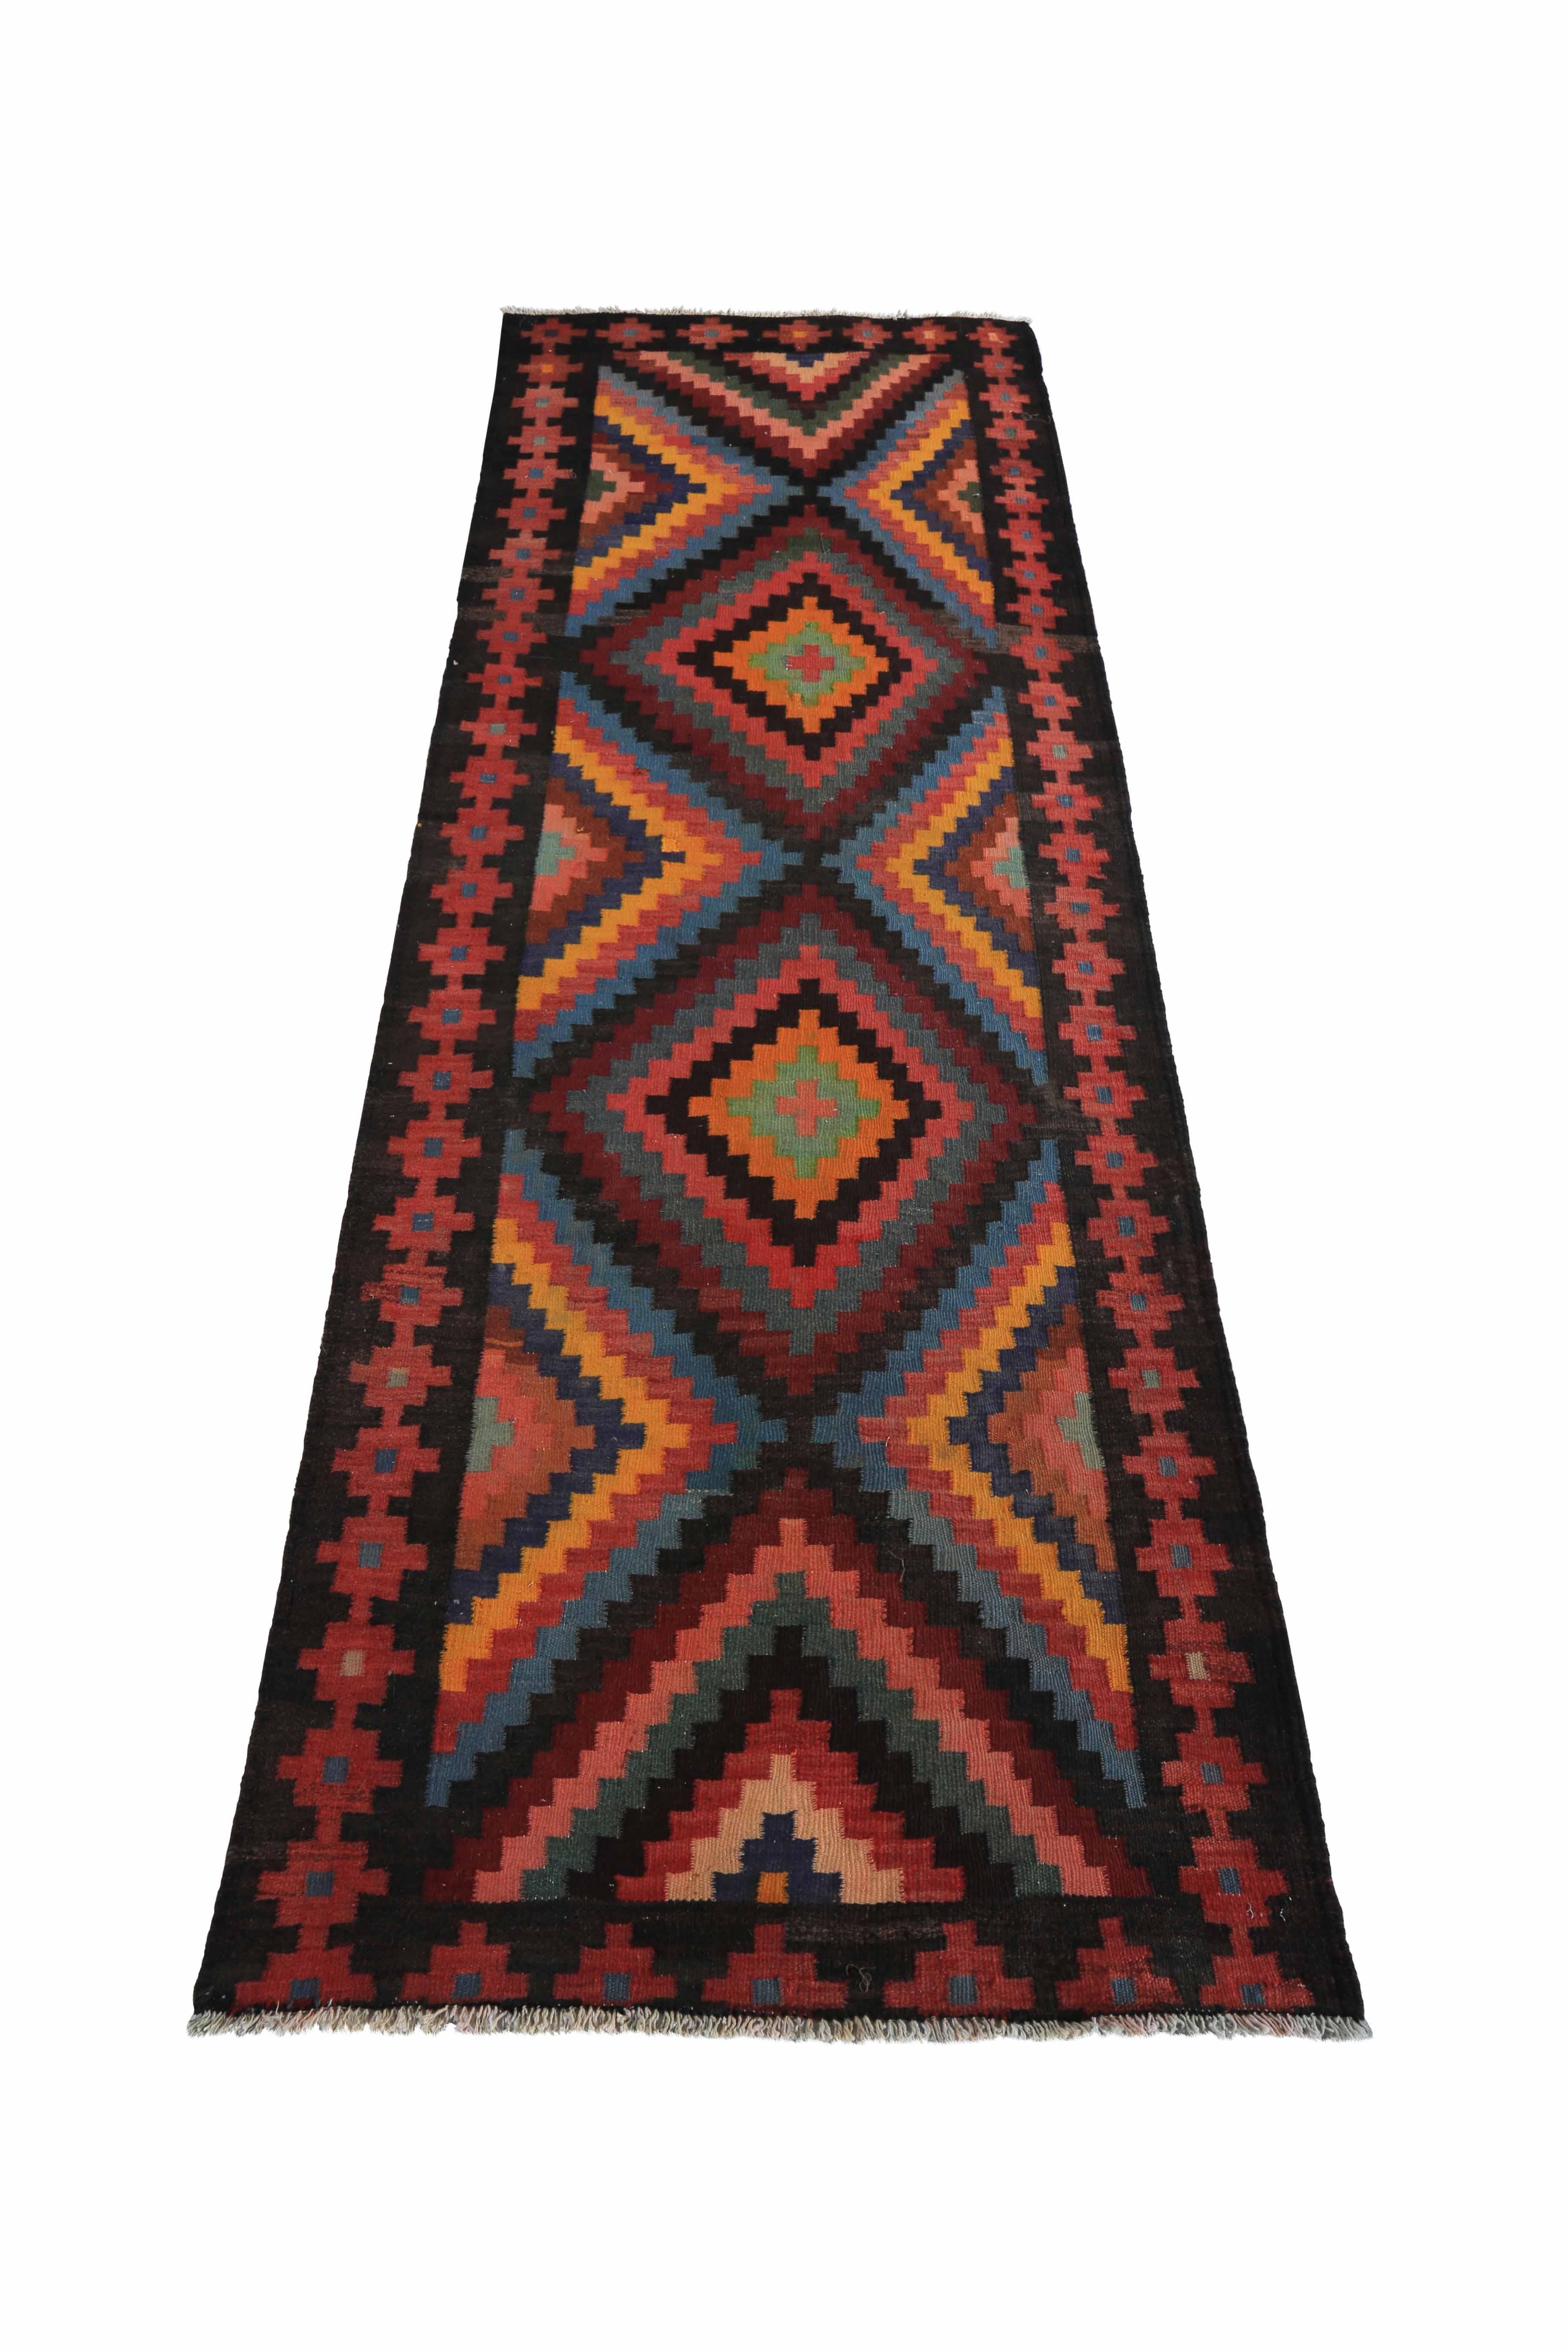 Modern Turkish rug handwoven from the finest sheep’s wool and colored with all-natural vegetable dyes that are safe for humans and pets. It’s a traditional Kilim flat-weave design featuring colorful diamond patterns. It’s a stunning piece to get for